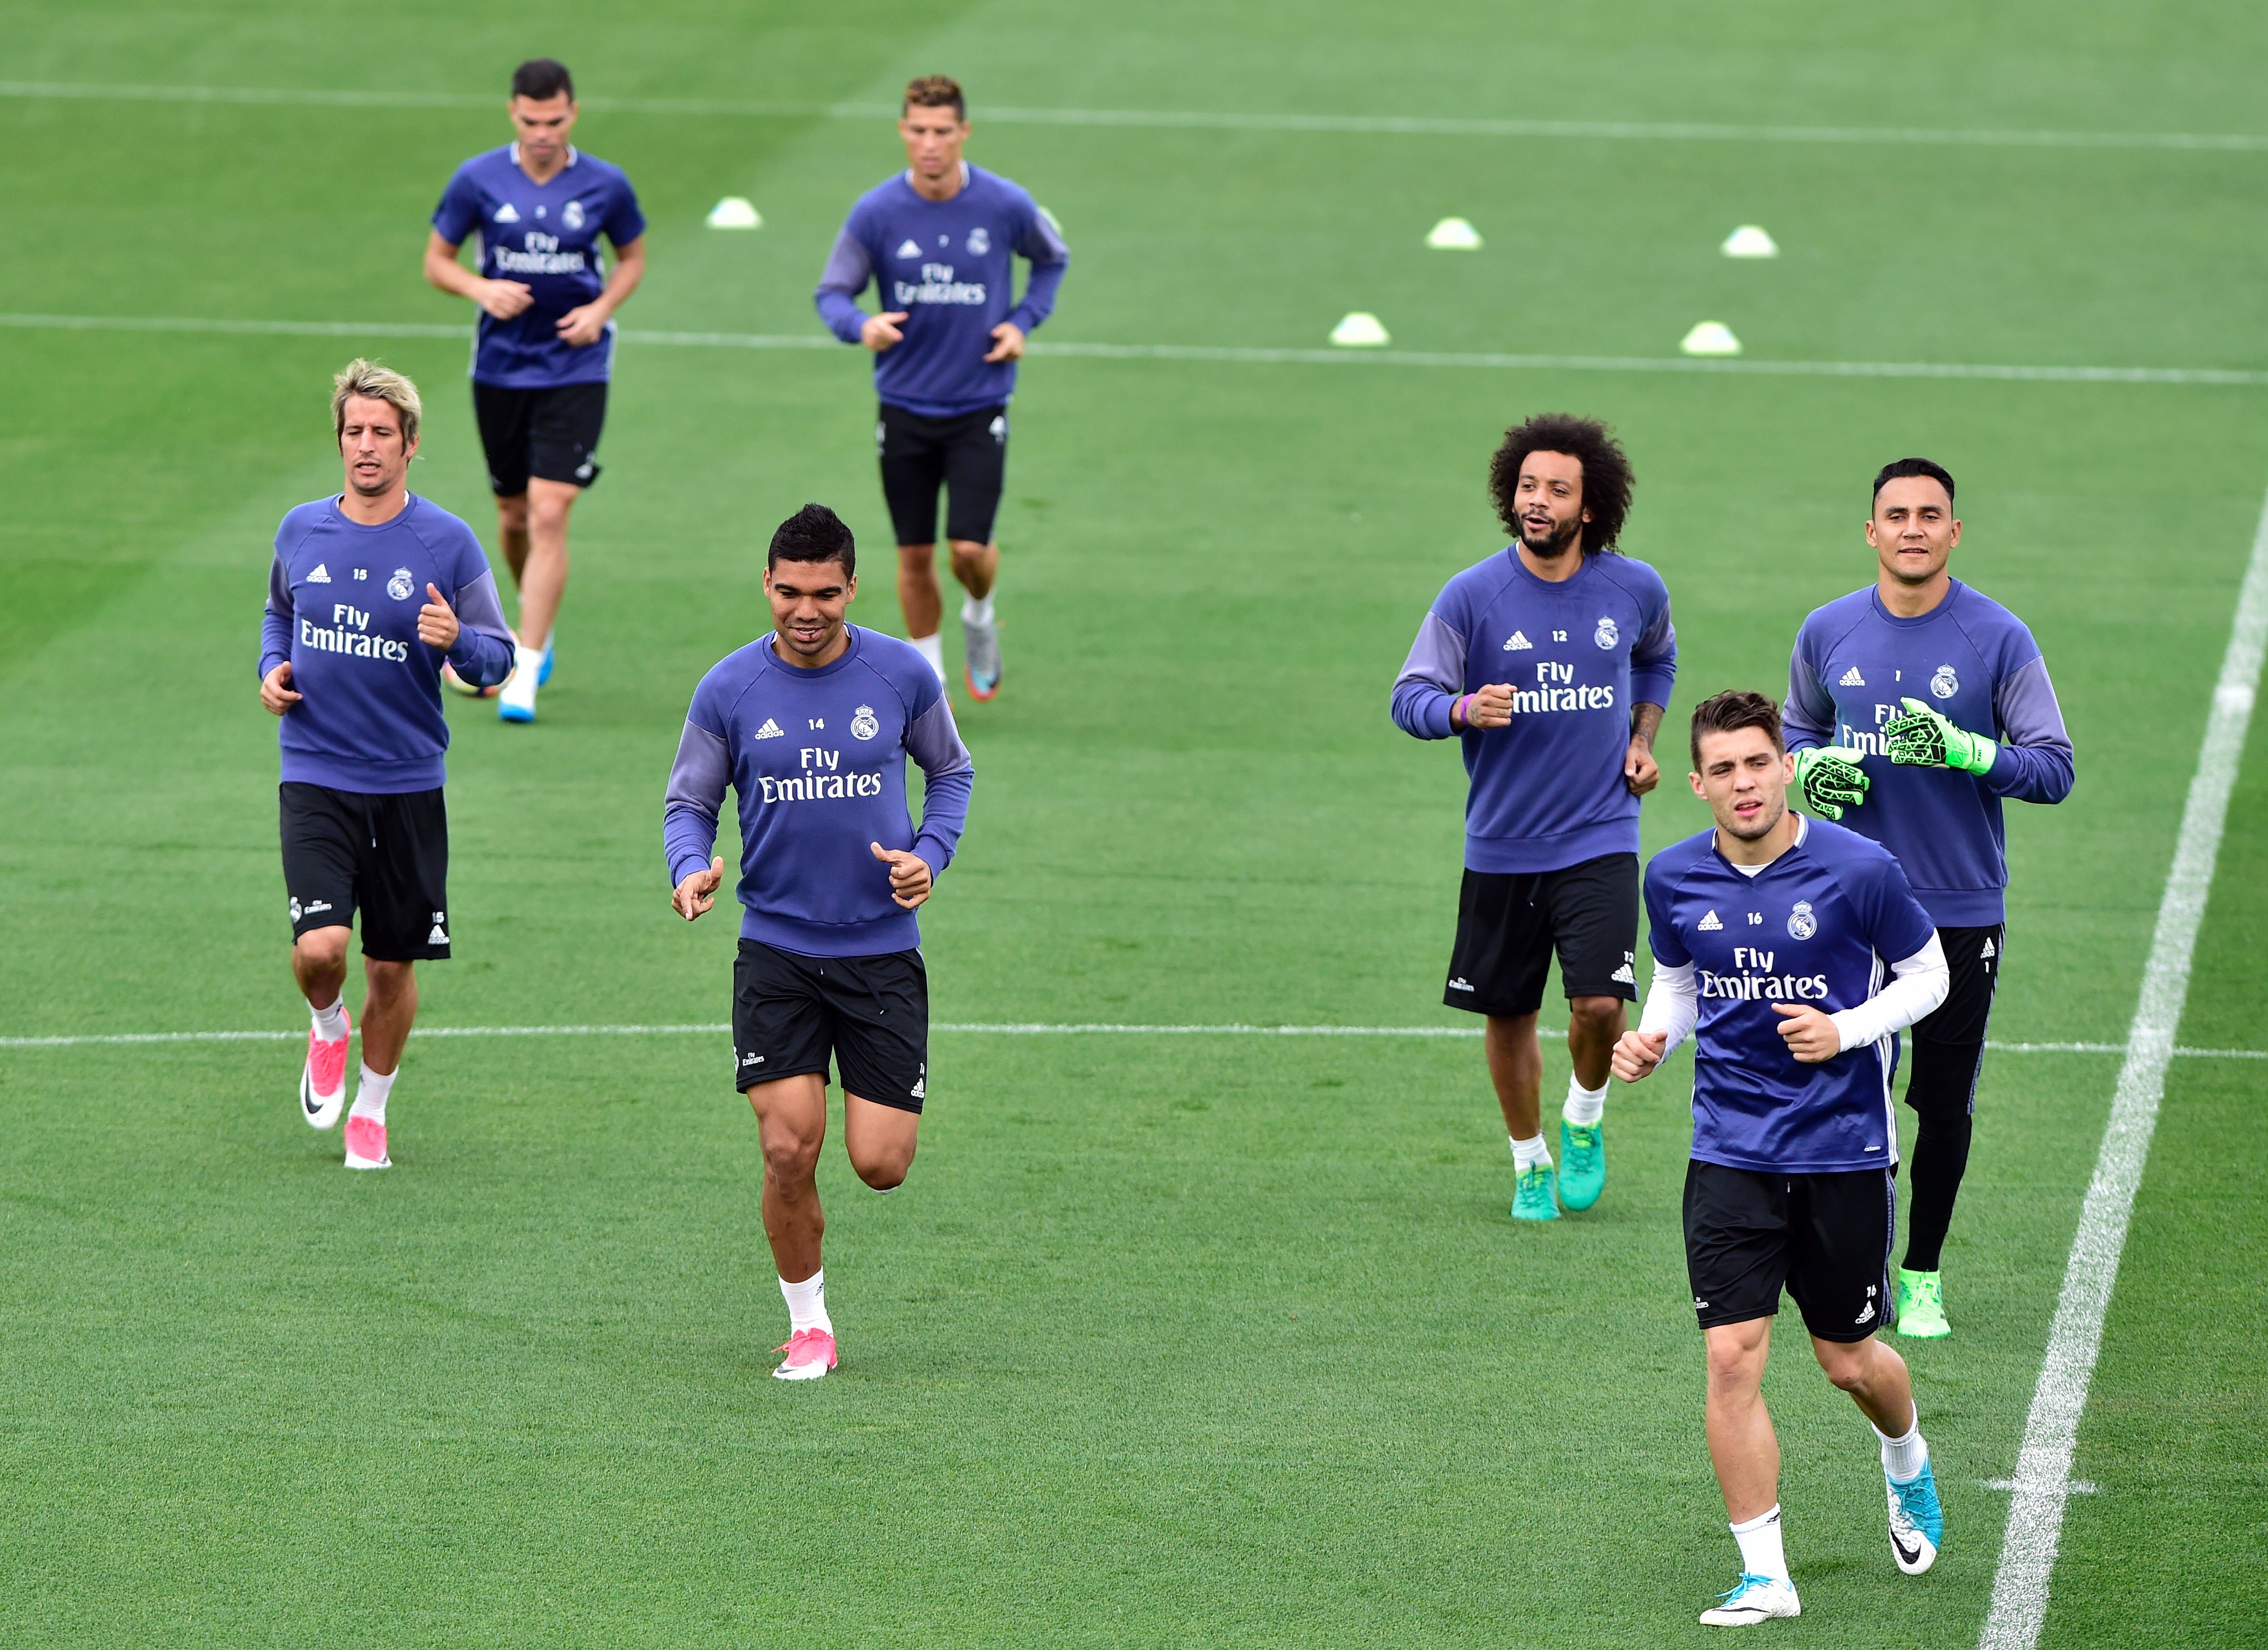 (fromL) Real Madrid's Portuguese defender Fabio Coentrao, Real Madrid's Portuguese defender Pepe, Real Madrid's Brazilian midfielder Casemiro, Real Madrid's Portuguese forward Cristiano Ronaldo, Real Madrid's Brazilian defender Marcelo, Real Madrid's Croatian midfielder Mateo Kovacic and Real Madrid's Costa Rican goalkeeper Keylor Navas take part in a training session at Valdebebas training ground in Madrid on May 5, 2017, on the eve of the Spanish League match football match Granada CF vs Real Madrid CF. / AFP PHOTO / GERARD JULIEN        (Photo credit should read GERARD JULIEN/AFP/Getty Images)